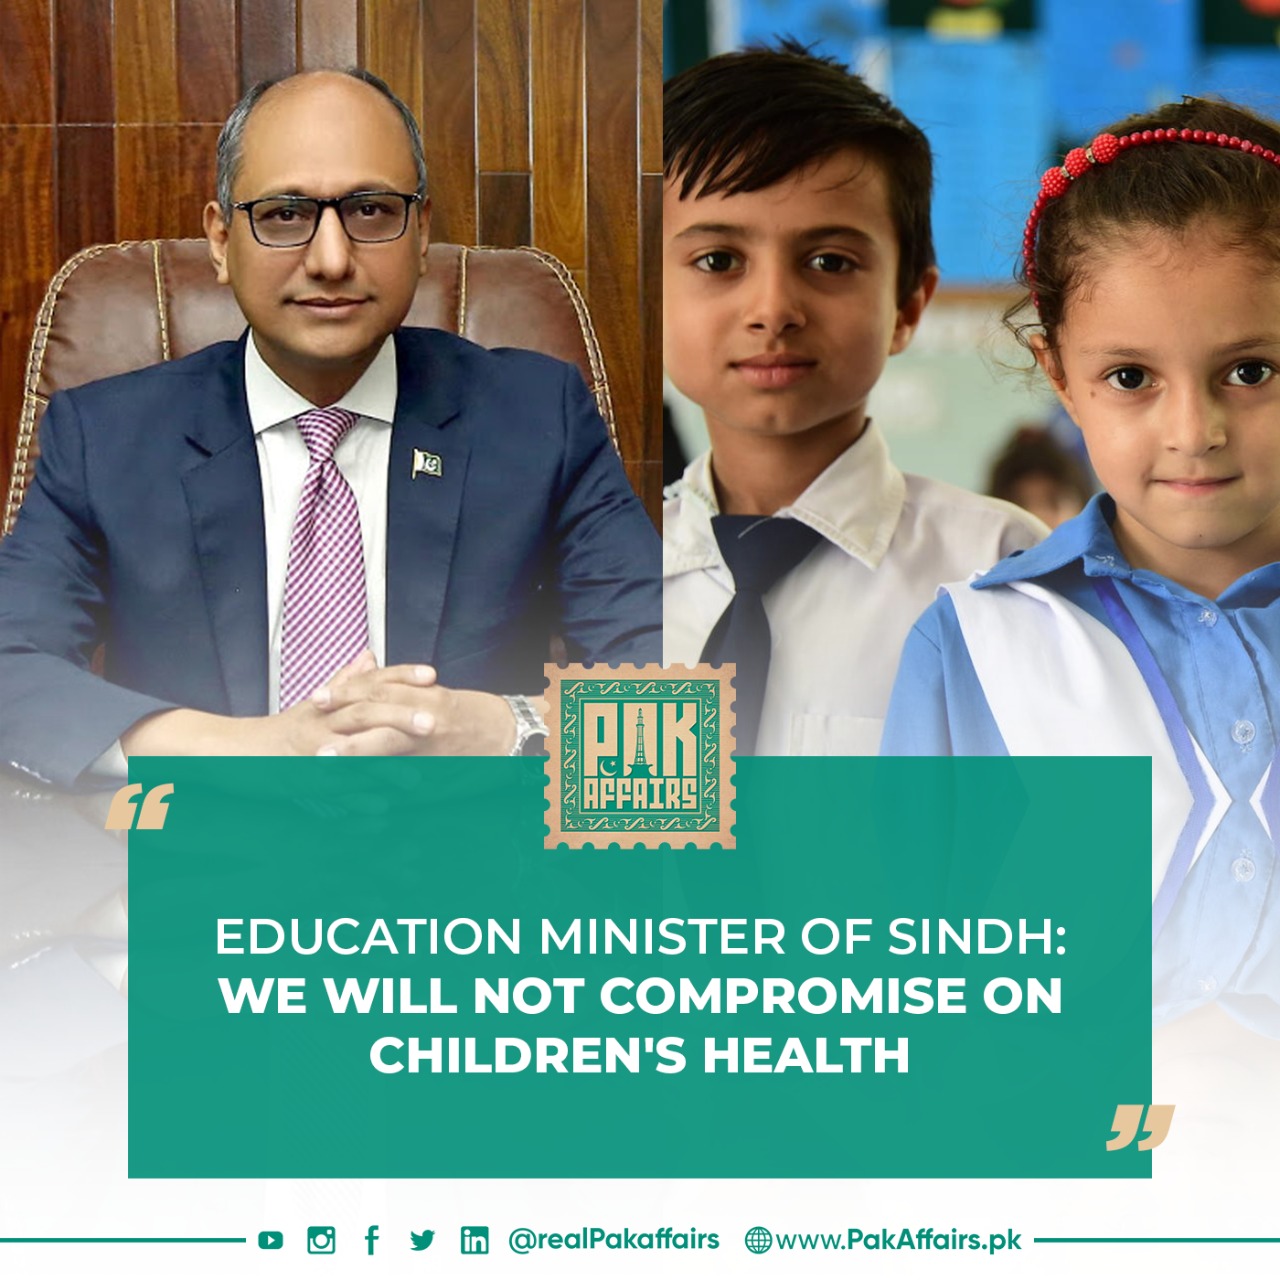 We will not compromise on children's health, says Education Minister of Sindh.